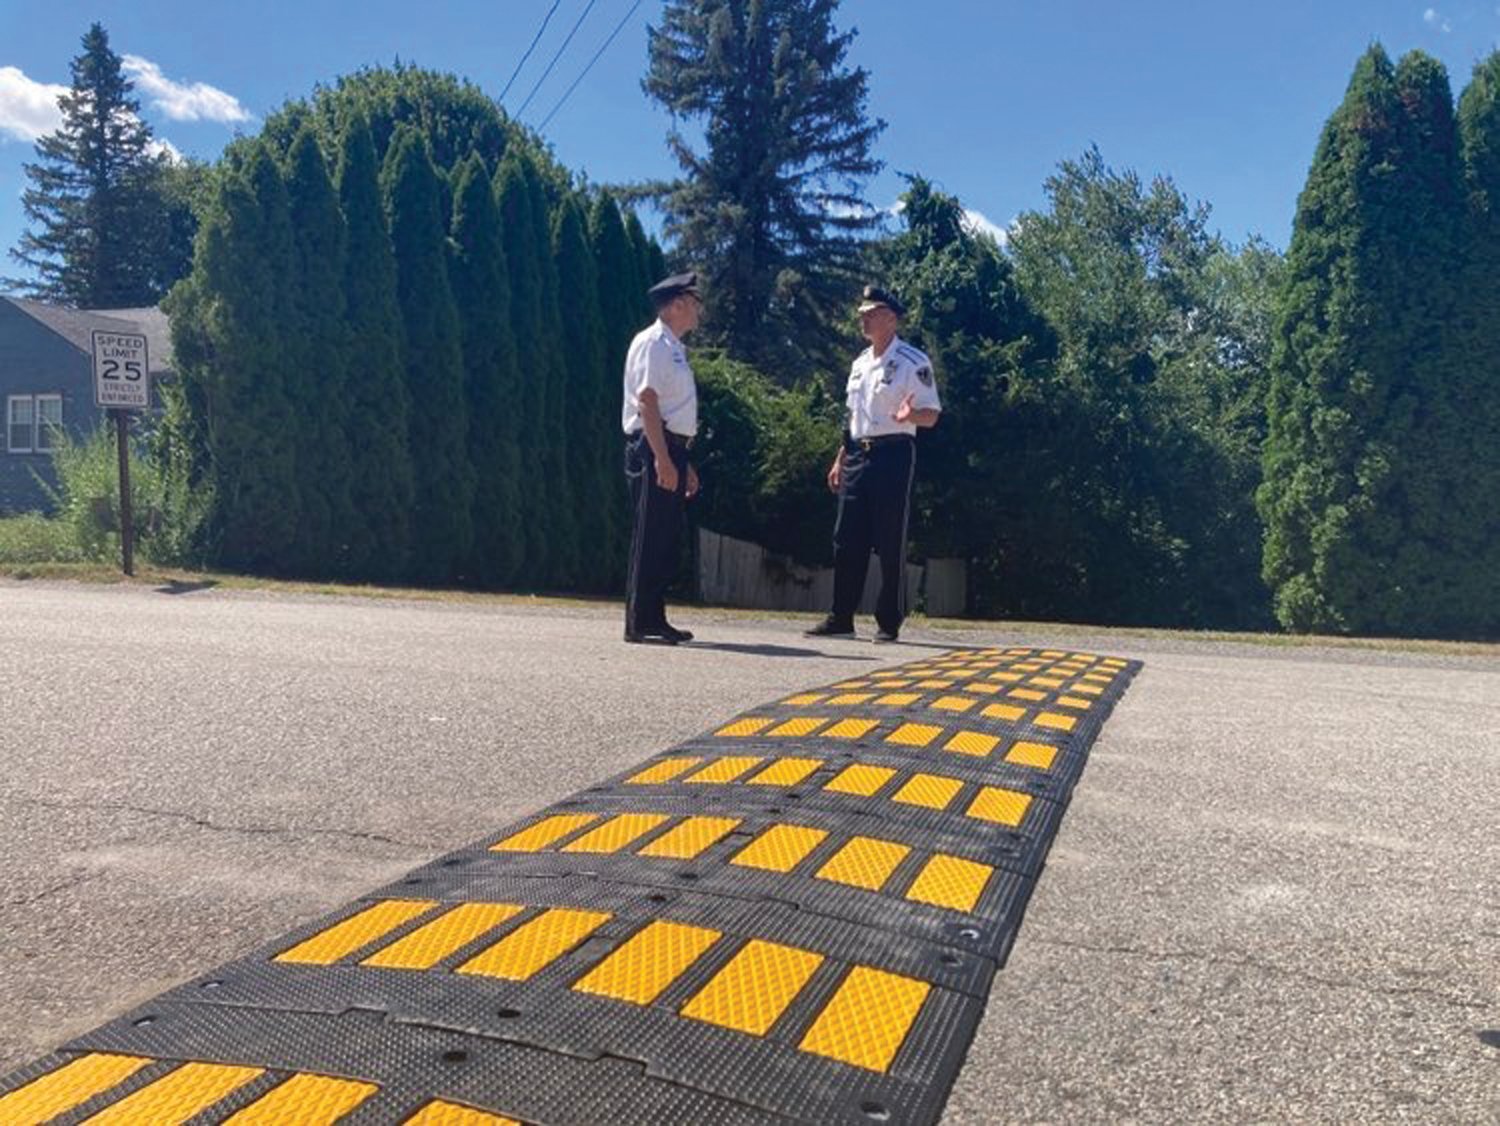 EASIER TO CROSS: The new sped hump installed on Cavalcade Boulevard has a lower profile than the temporary speed hump that was previously installed at the location. The lower profile should make it easier for cars to cross while still reducing speed in the neighborhood.